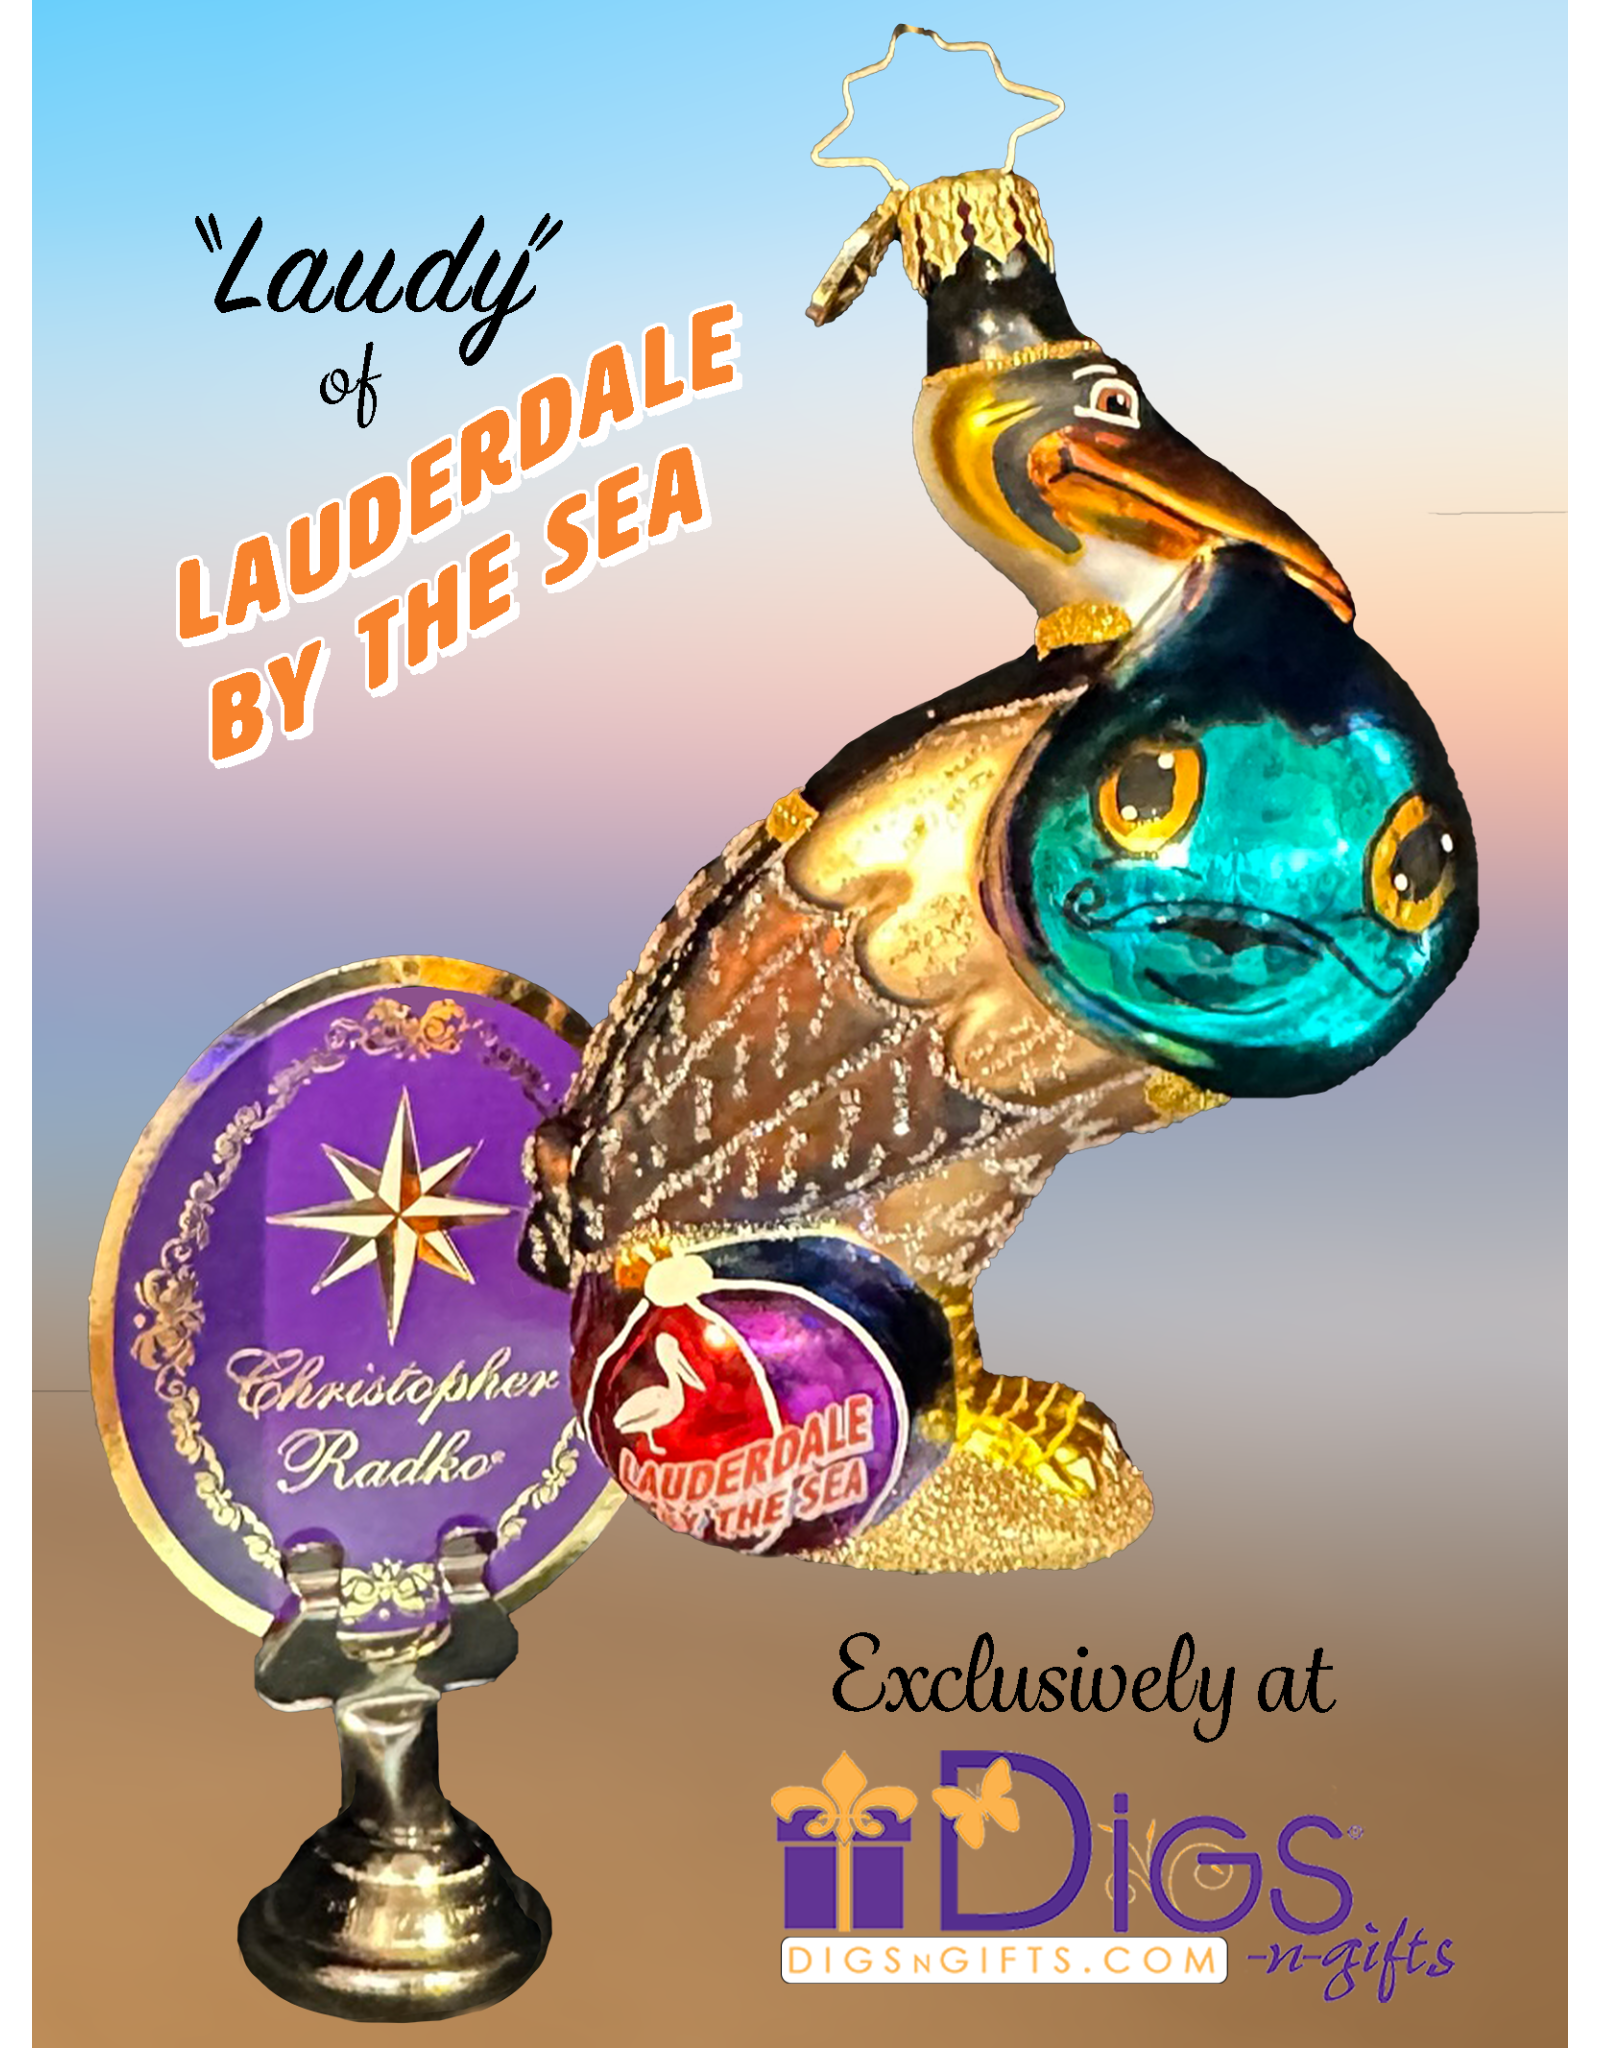 Christopher Radko Lauderdale-By-The-Sea Exclusive Christmas Ornament